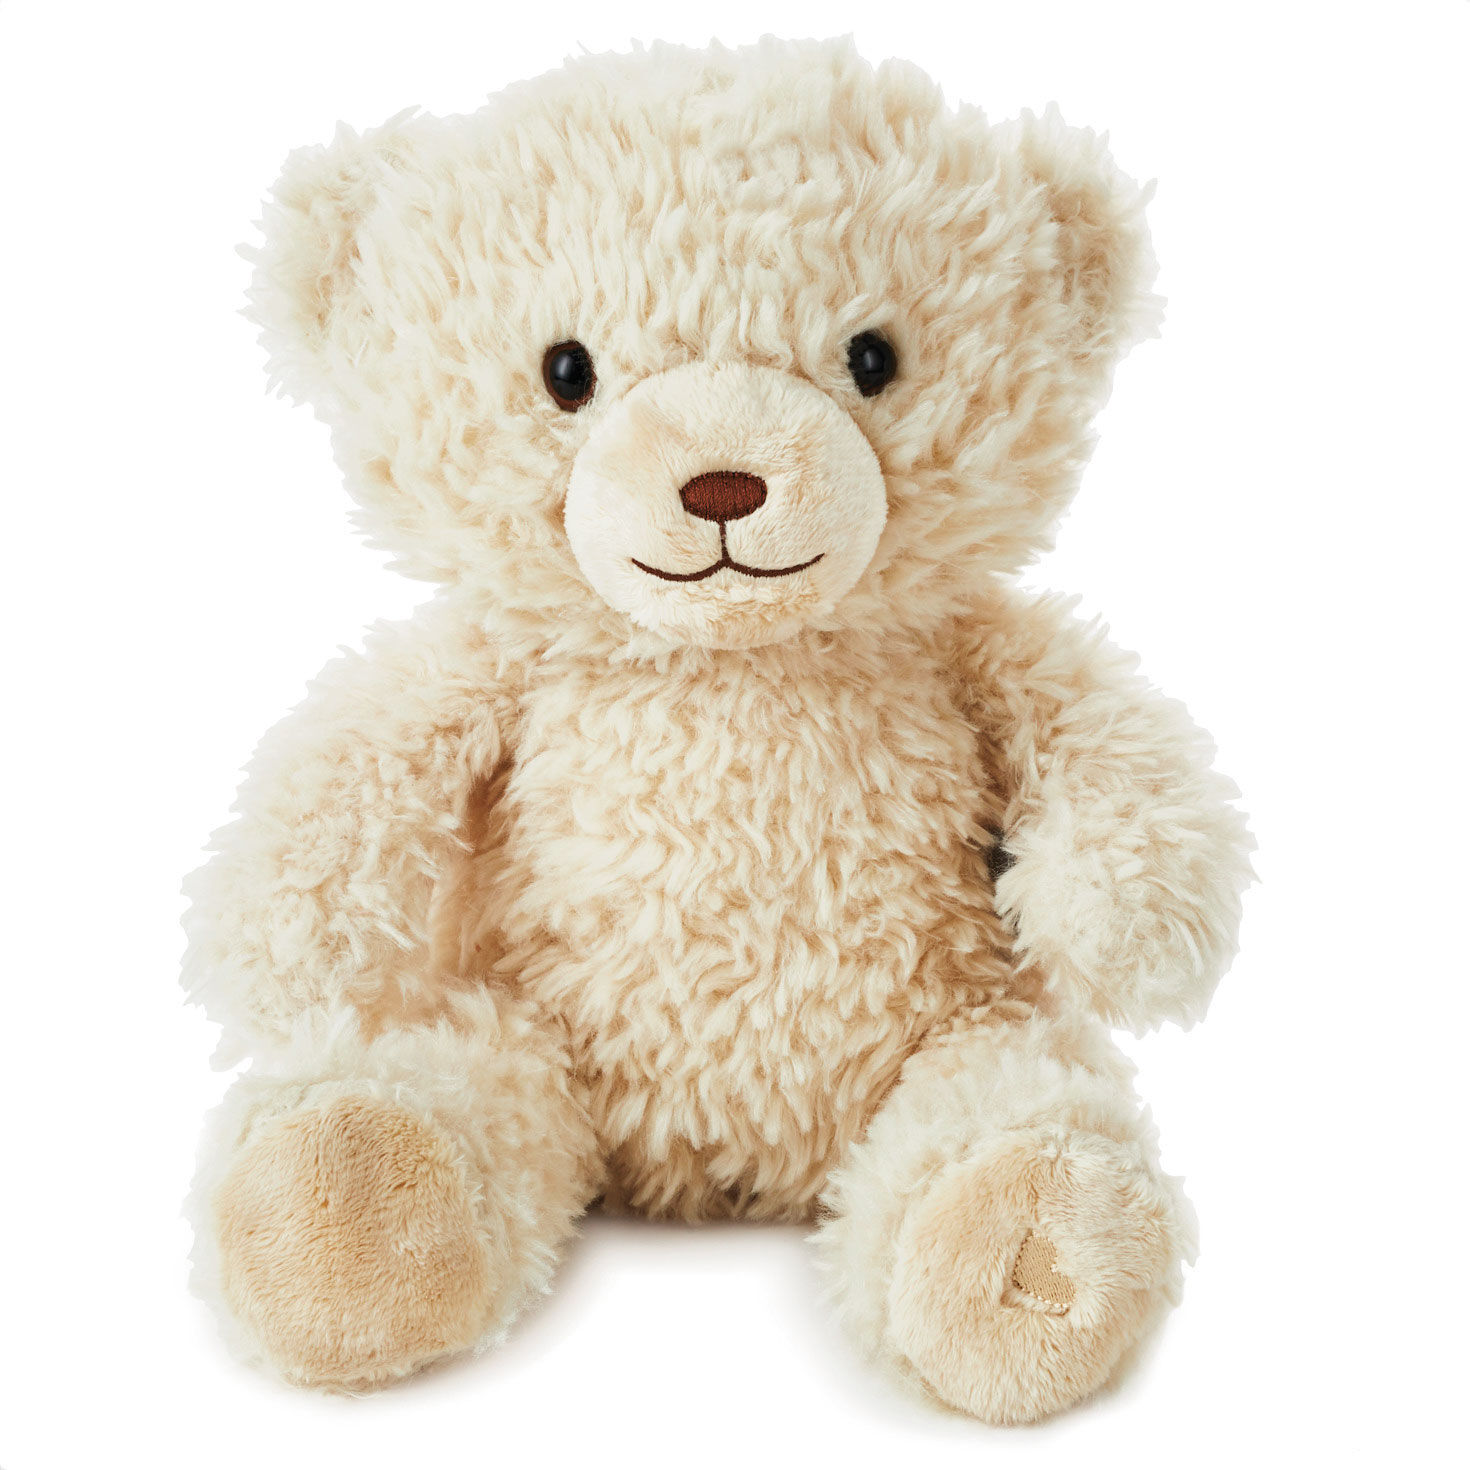 Teddy Day: By giving teddy, you have to talk about your heart, first know  how it happened, on this day the Bear started calling Teddy